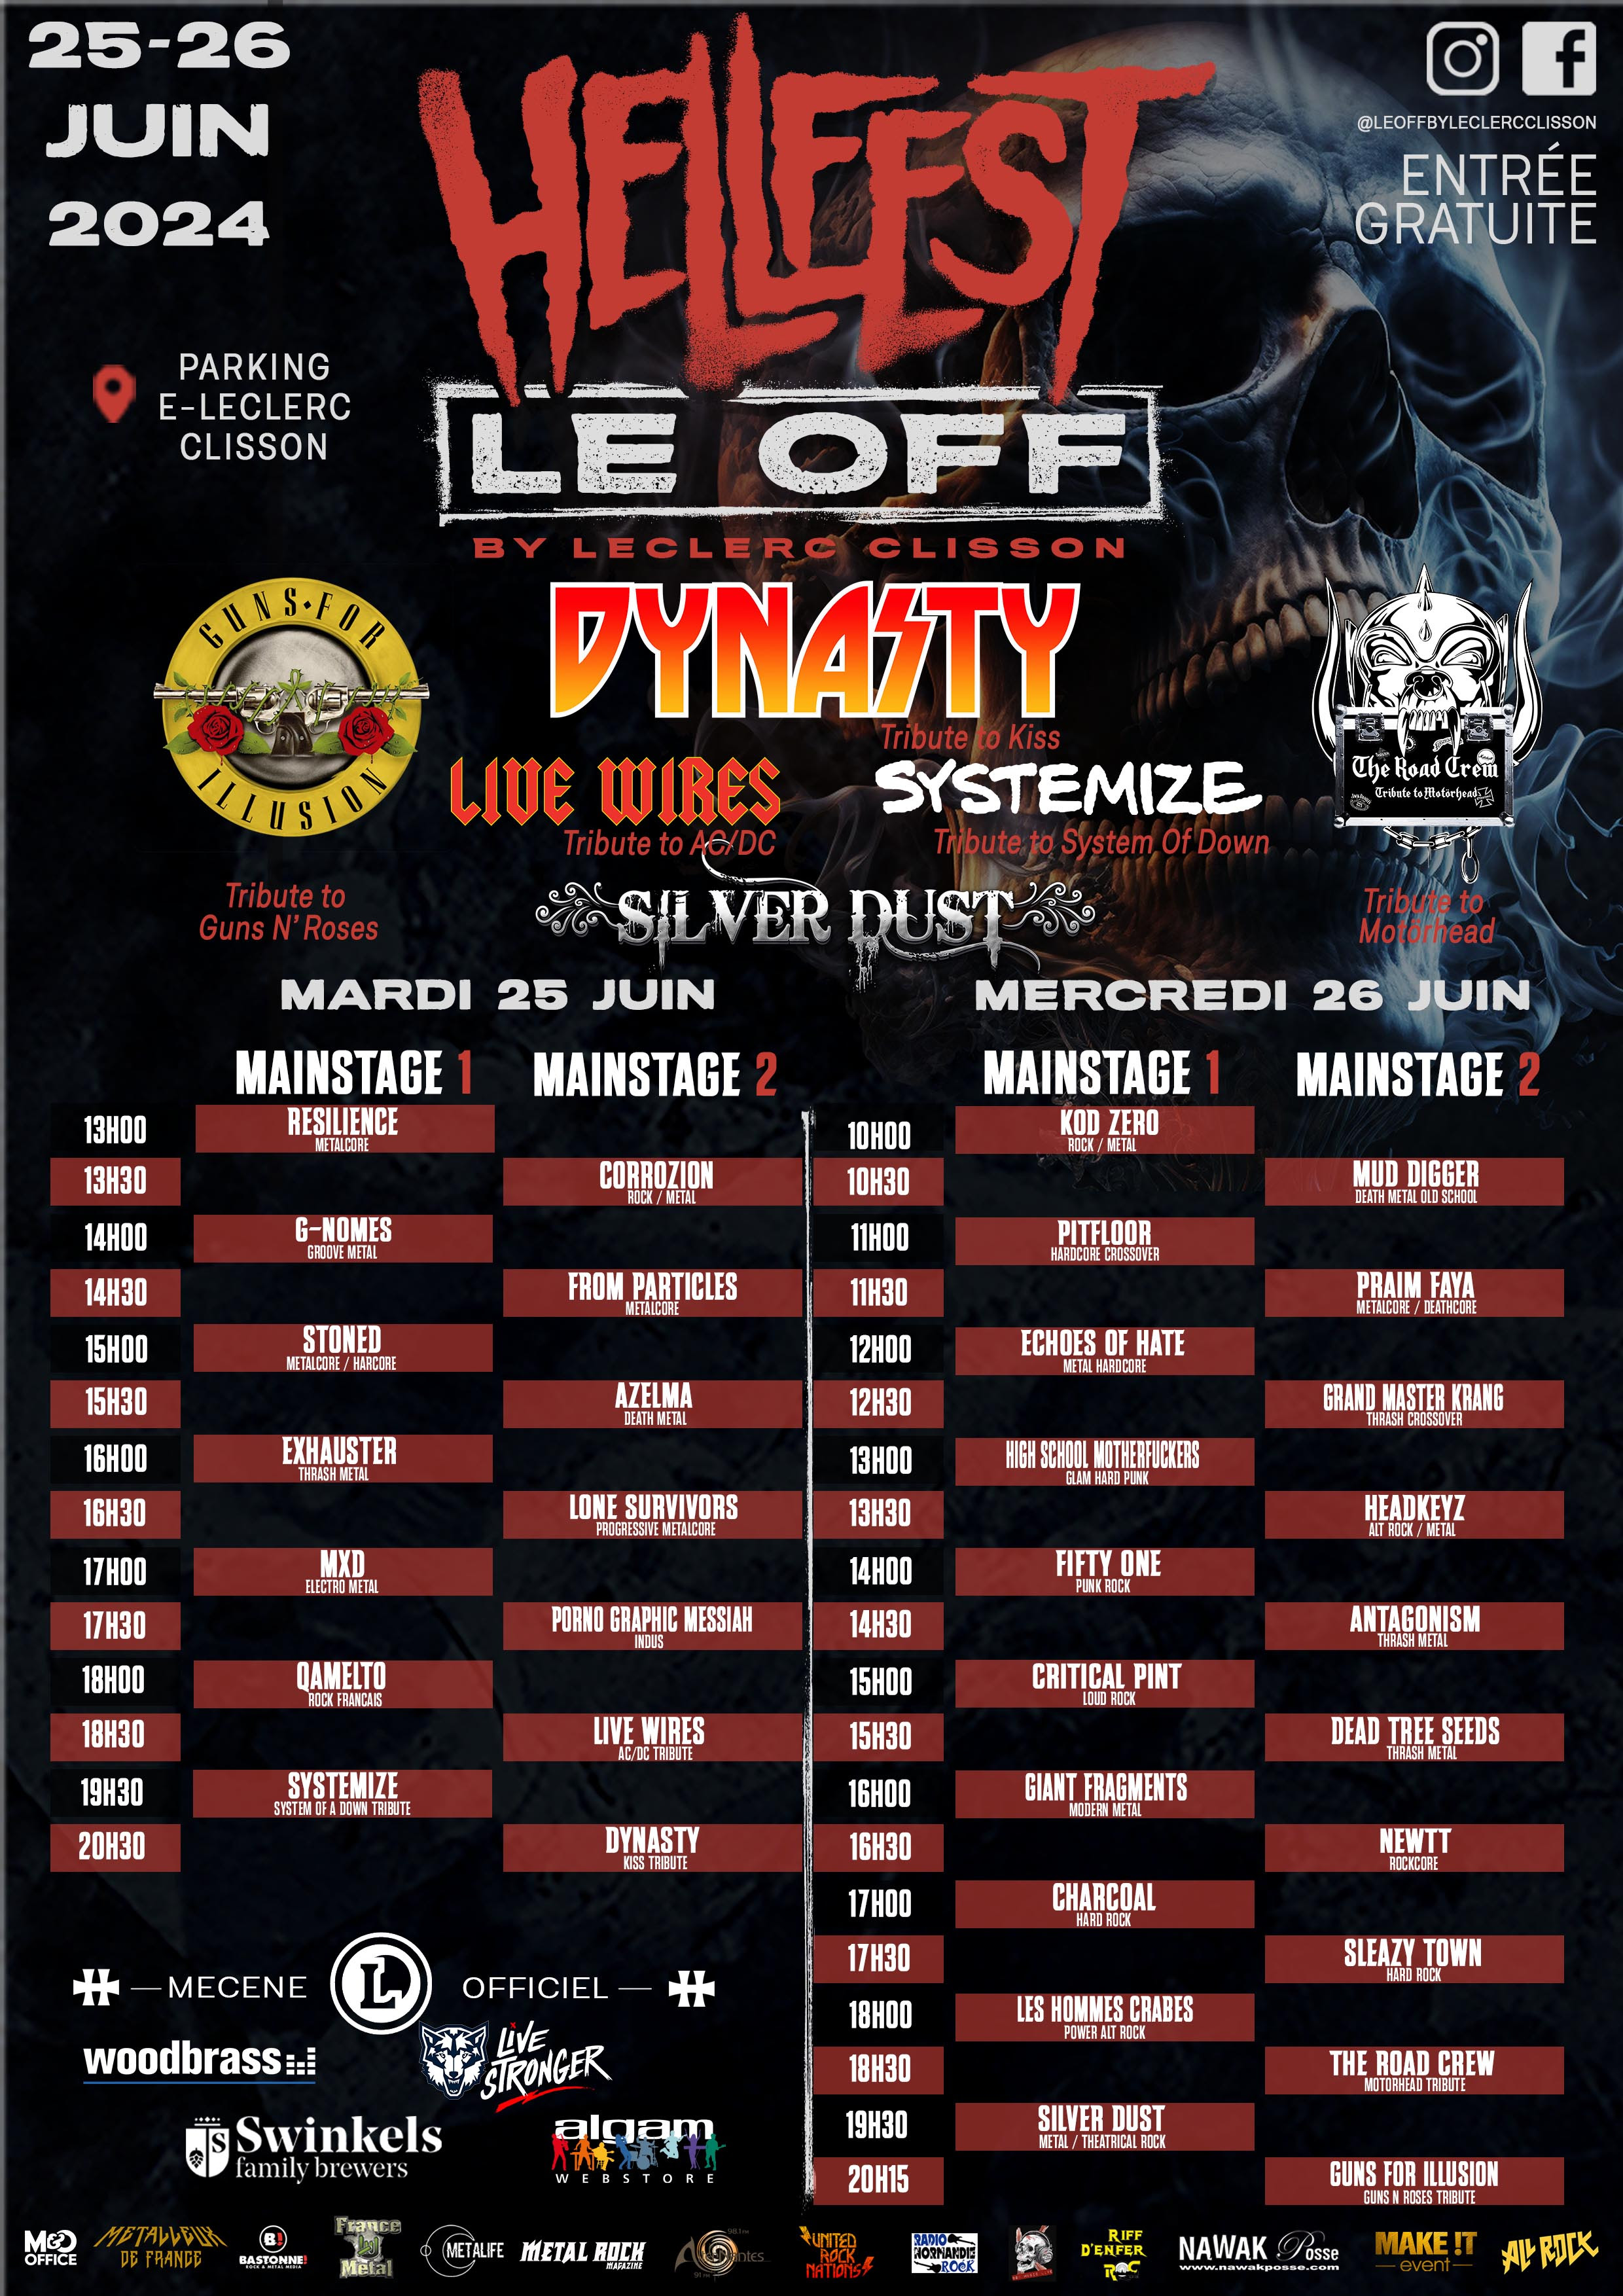 Hellfest Le Off 2024